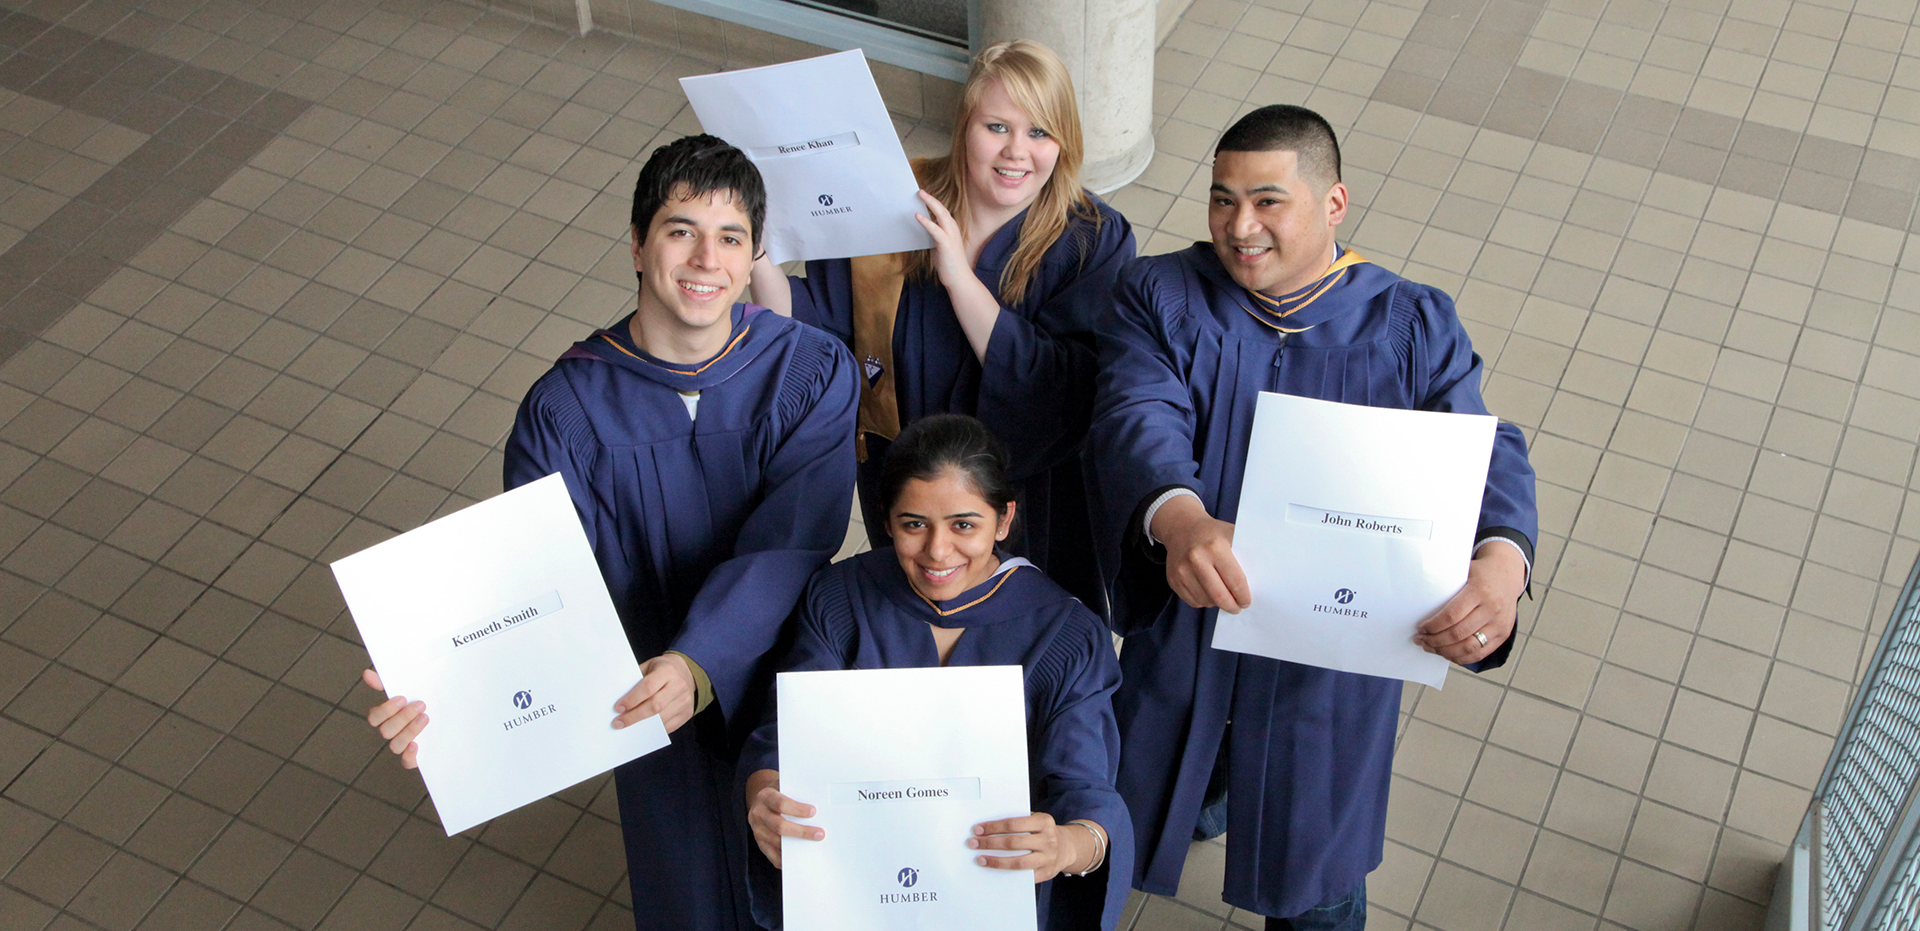 Four students in graduation robes holding up their diplomas